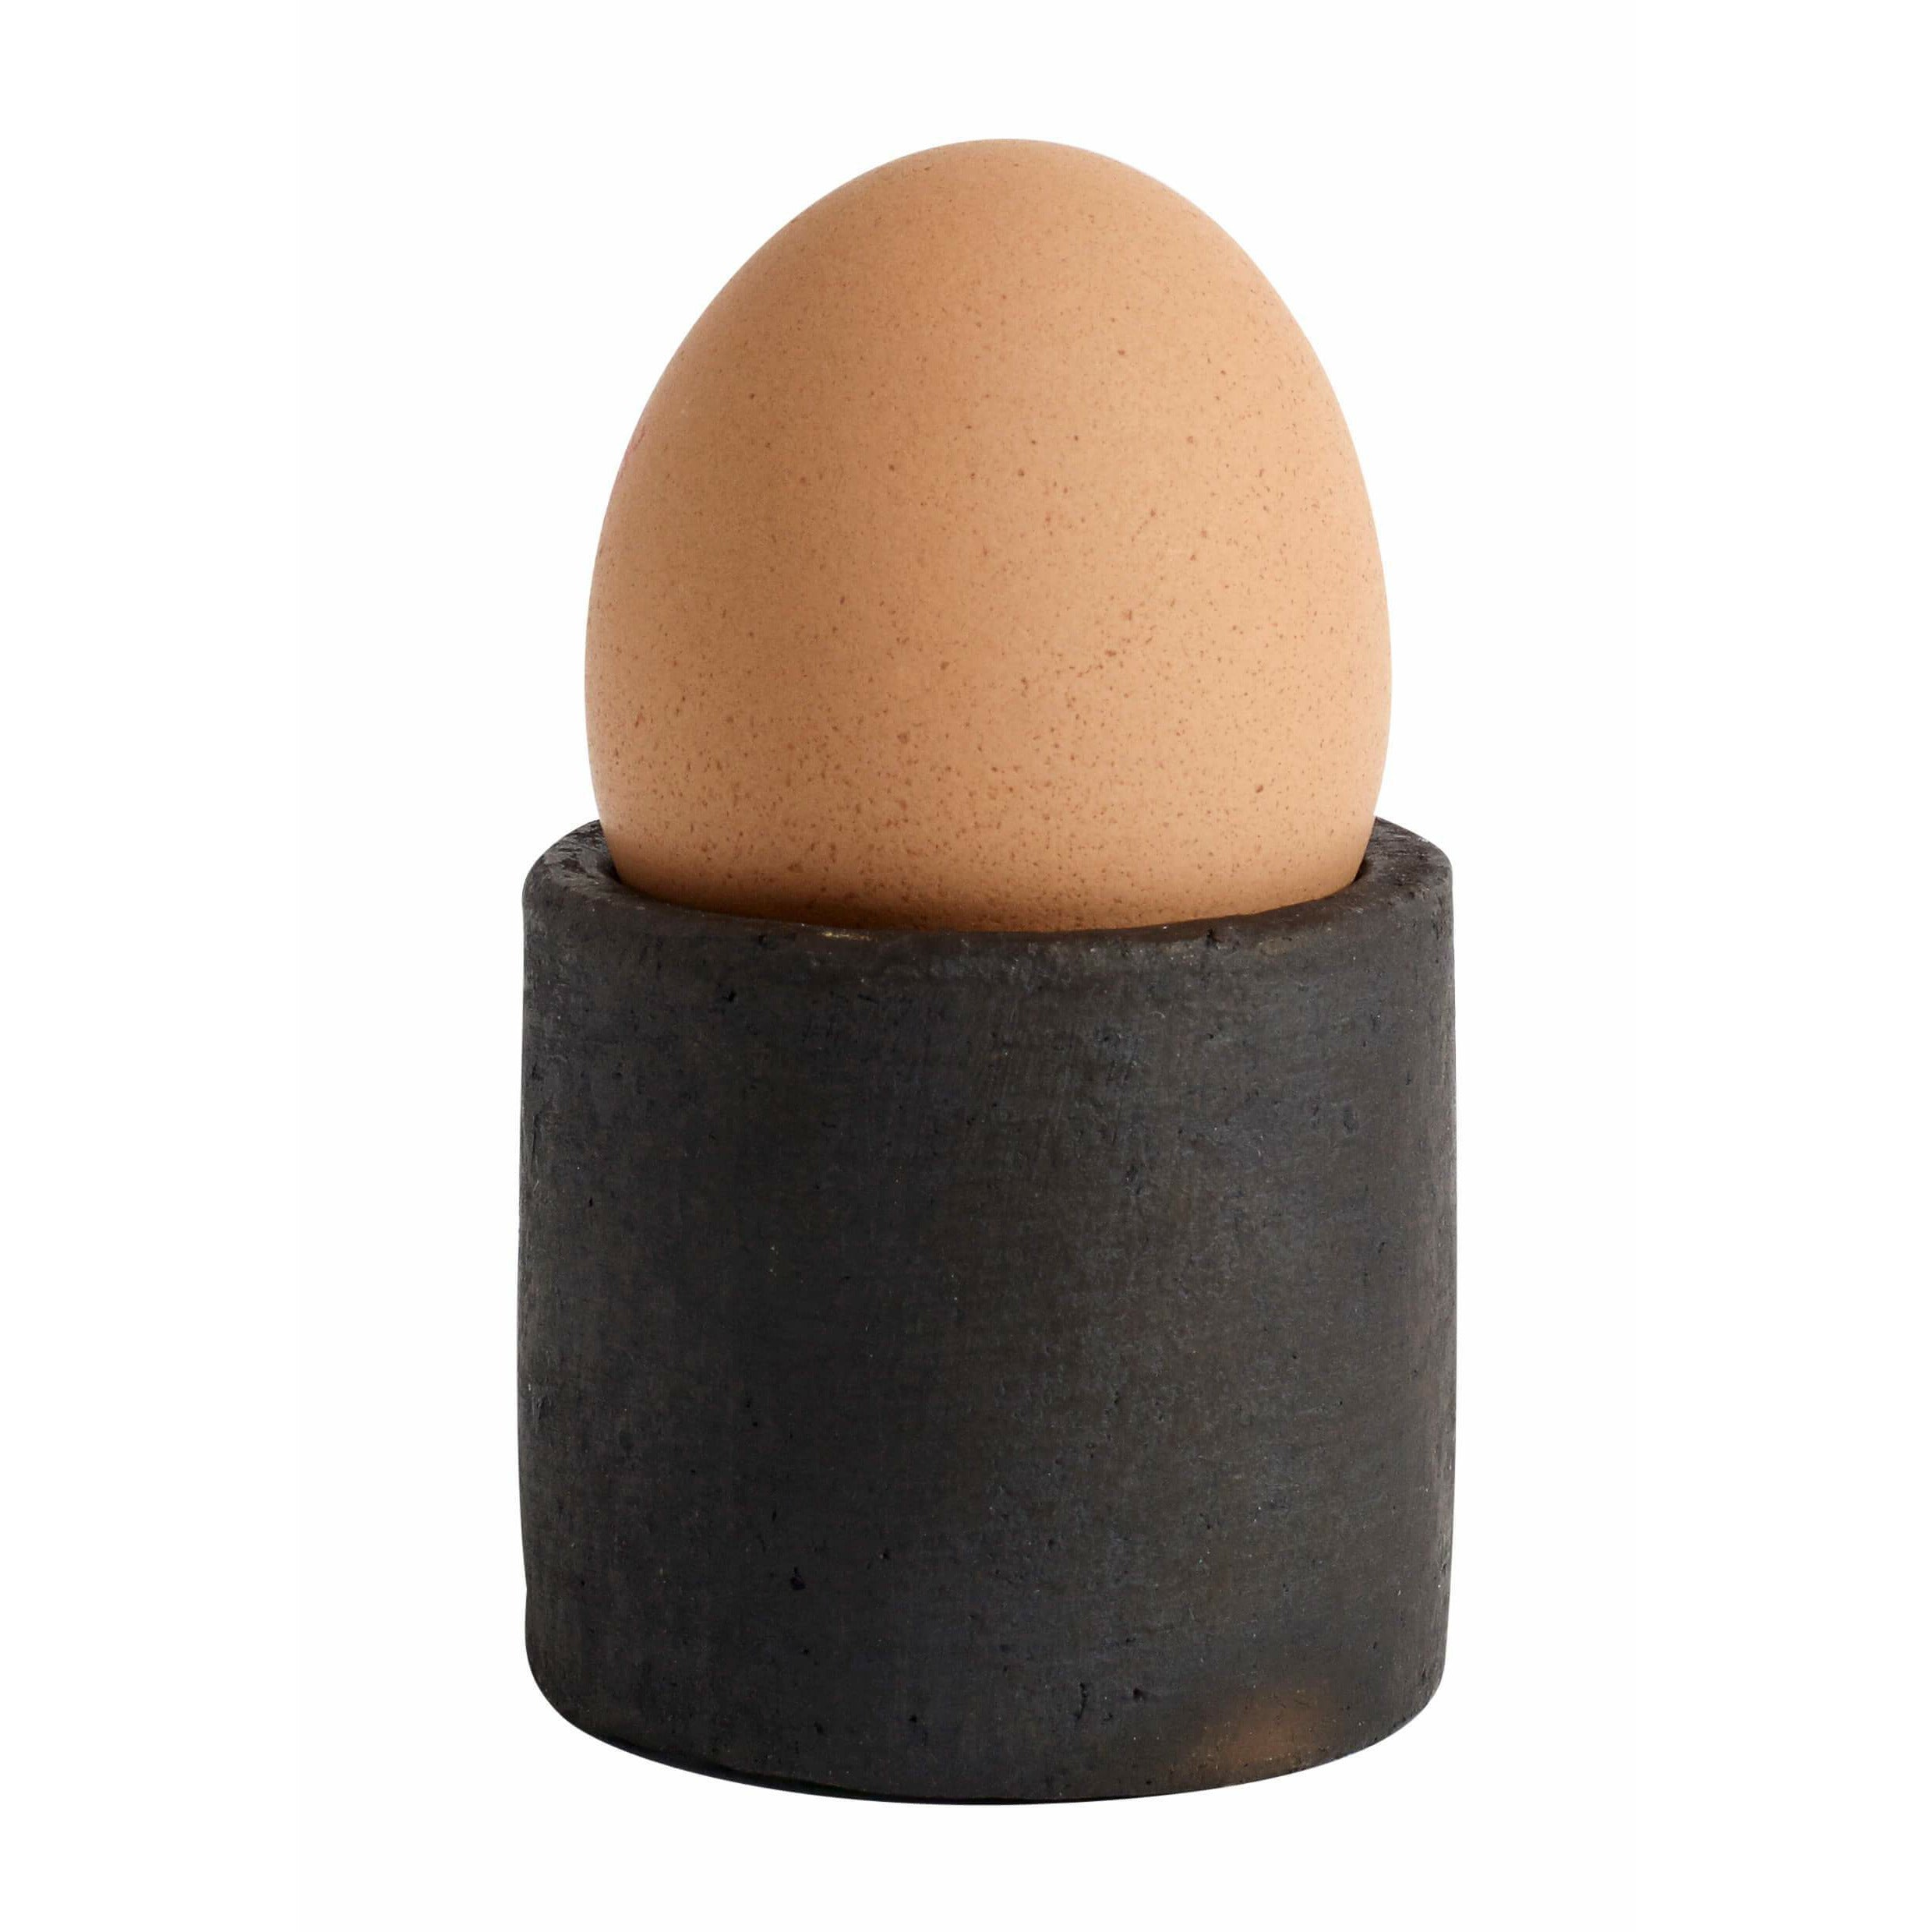 Muubs Hasel Egg Cup